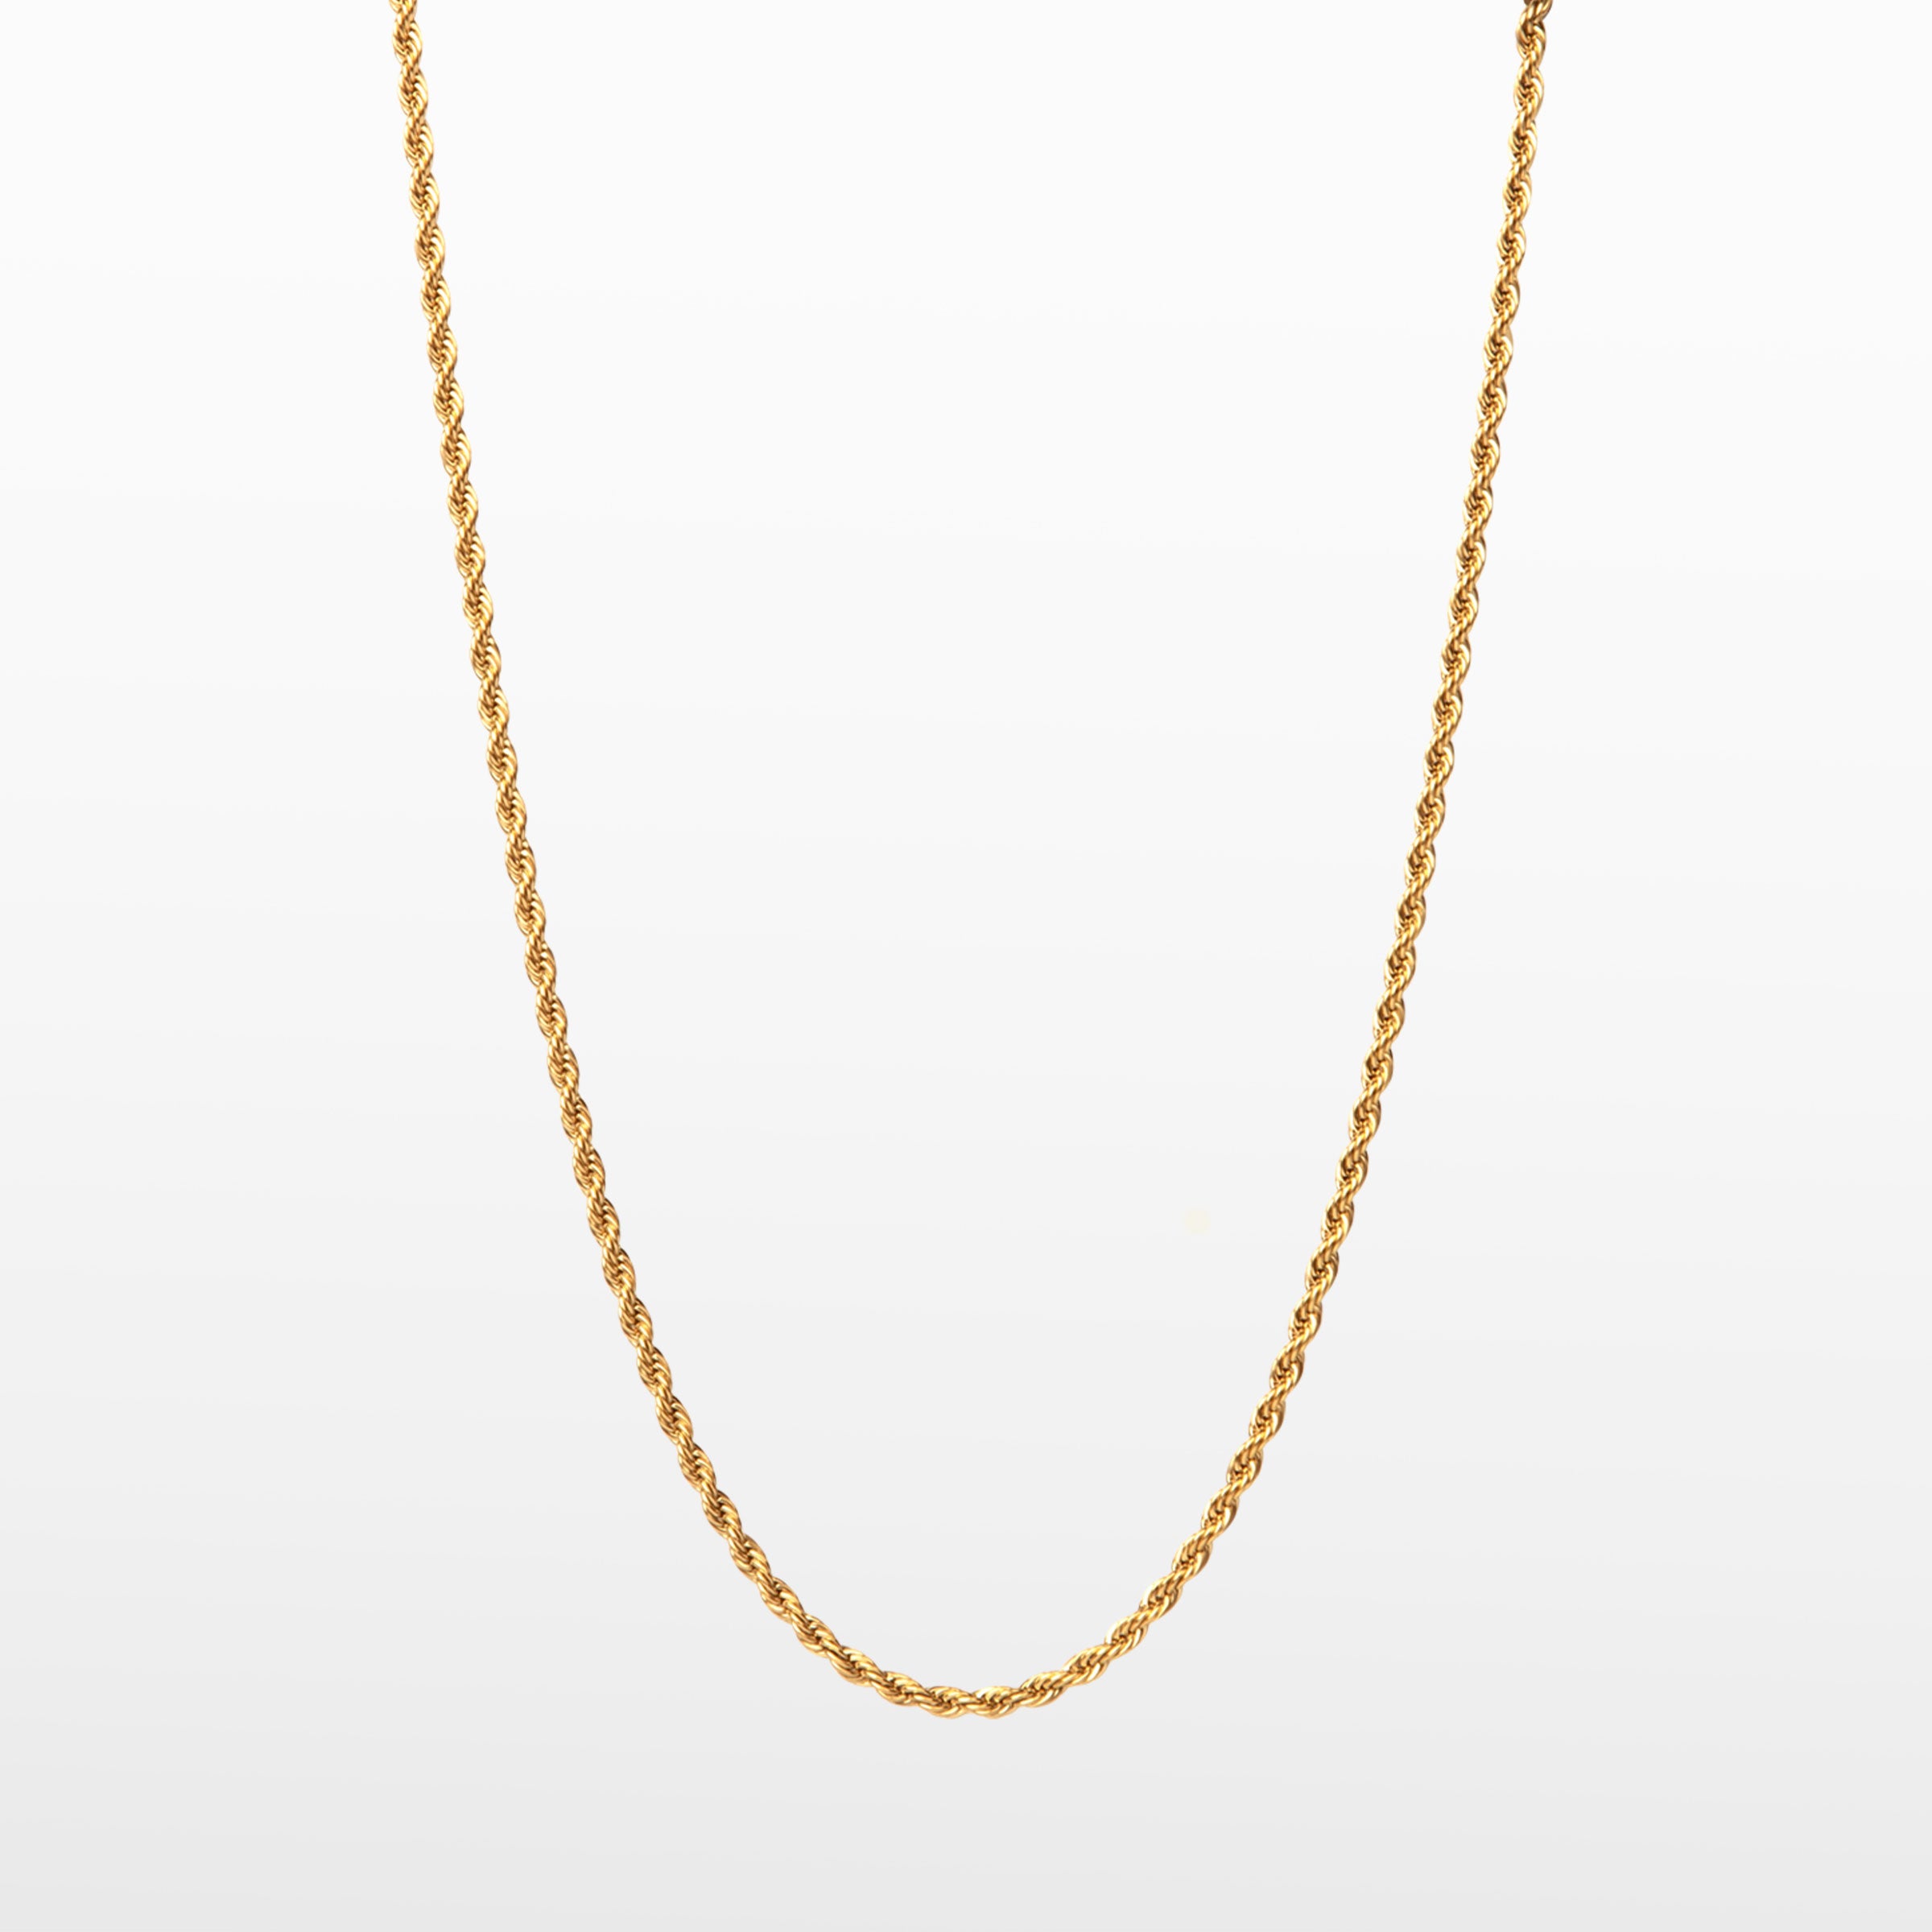 Image of the Twisted Rope Chain in Gold is crafted from thick 18K Gold Plated material. Dimensions are measured at 45cm, 50cm, or 55cm in length and 3mm in width. As an additional assurance, it is designed to be Allergy-free, Non-Tarnishable, and Water-resistant.